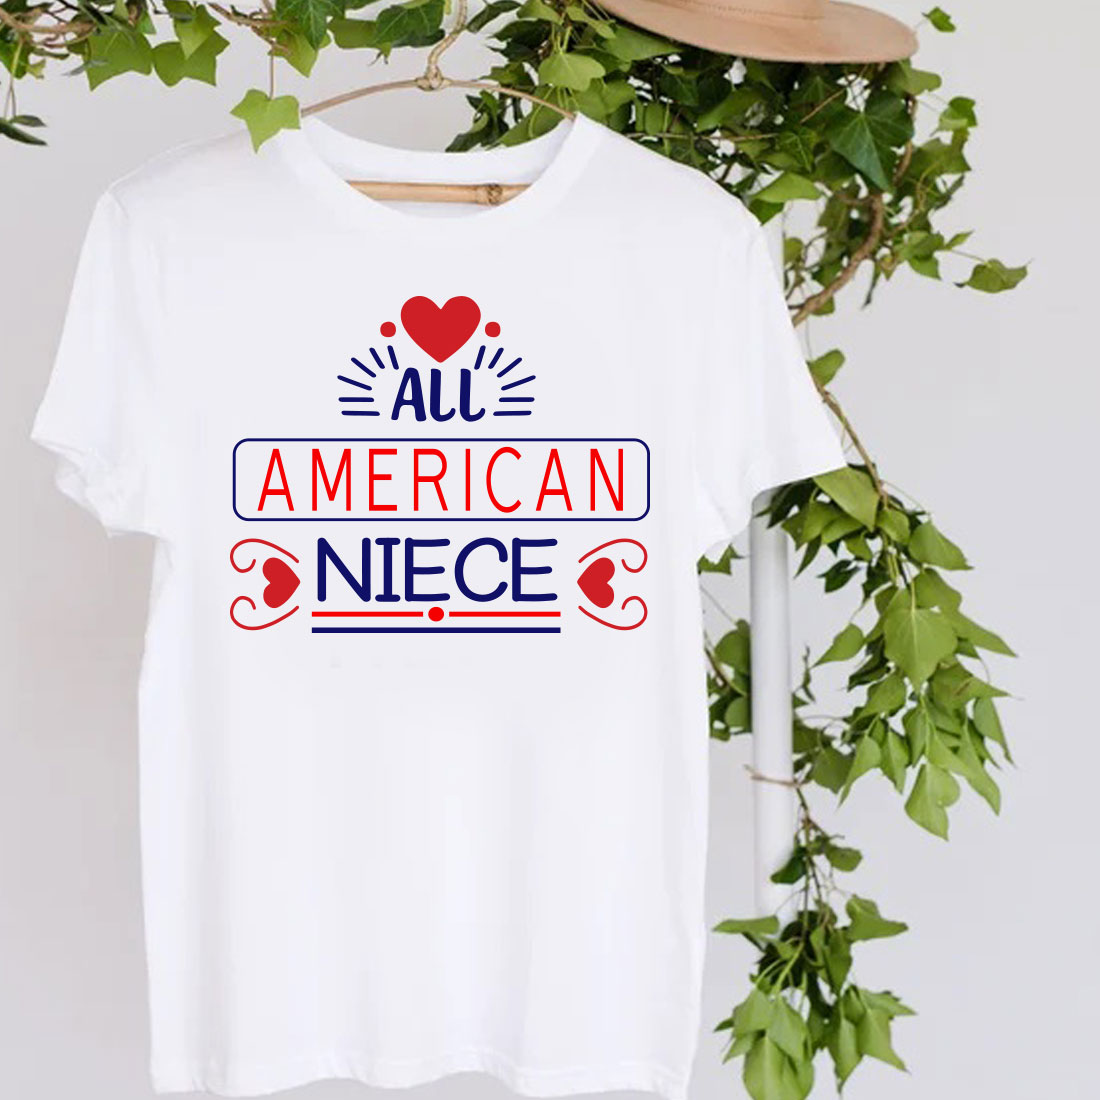 American nice t - shirt hanging on a wall.